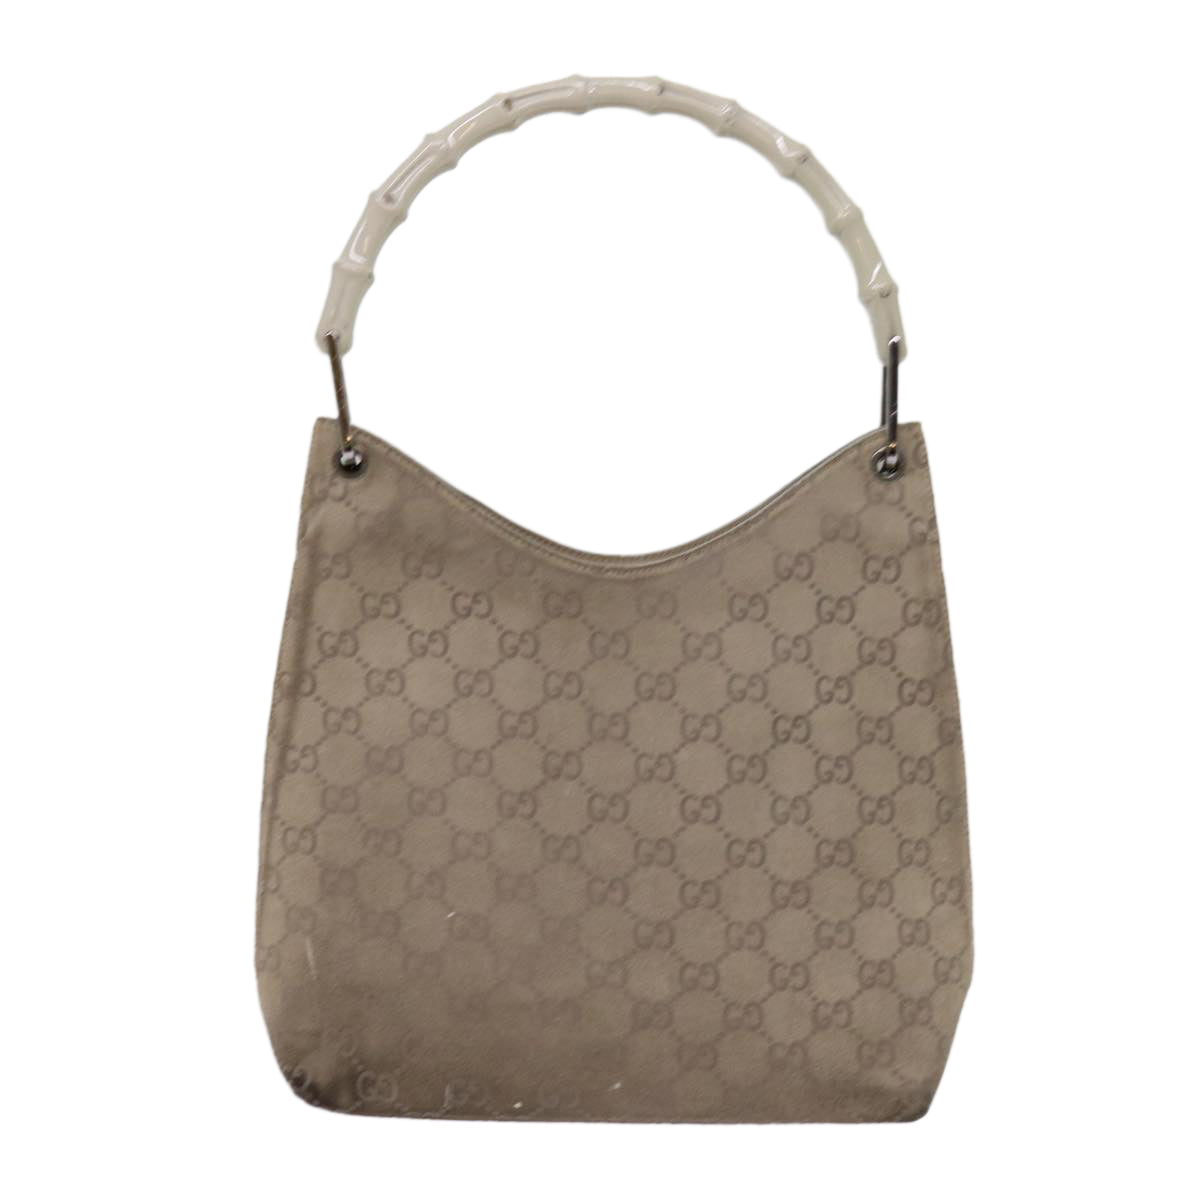 GUCCI GG Canvas Bamboo Shoulder Bag Gray 001 2058 3007 Auth 69361 - 0